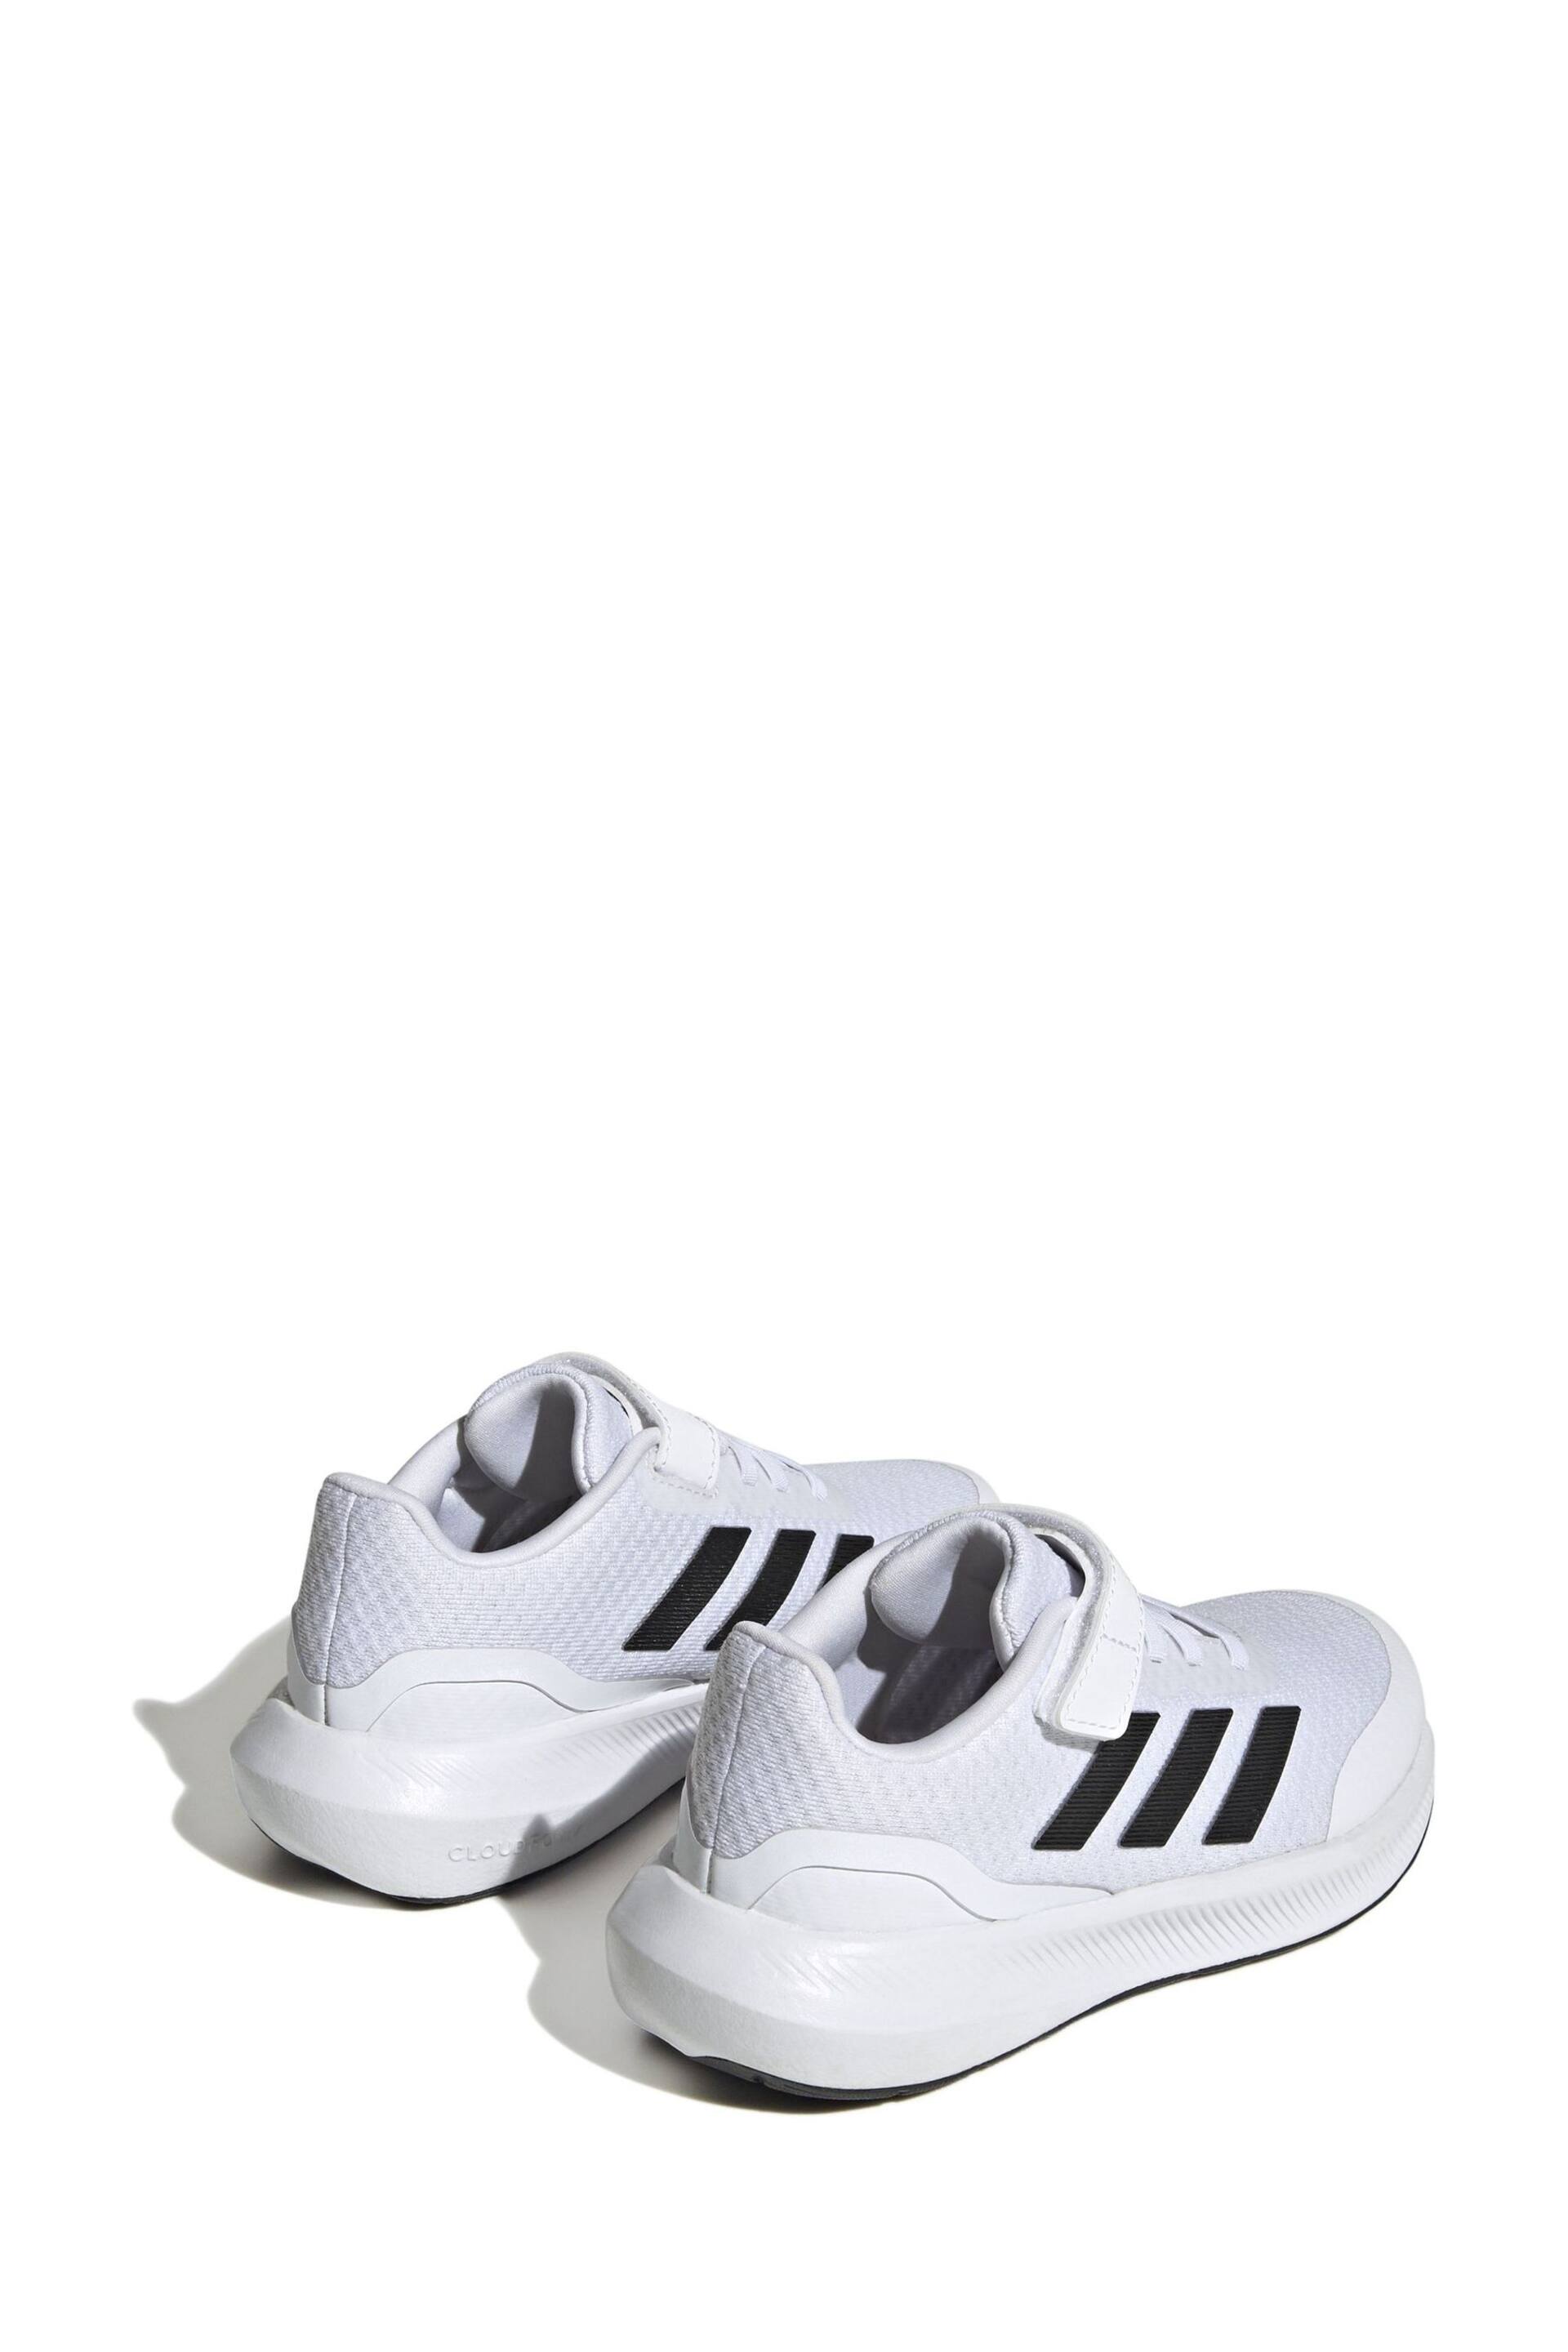 adidas White Sportswear Runfalcon 3.0 Elastic Lace Top Strap Trainers - Image 3 of 9